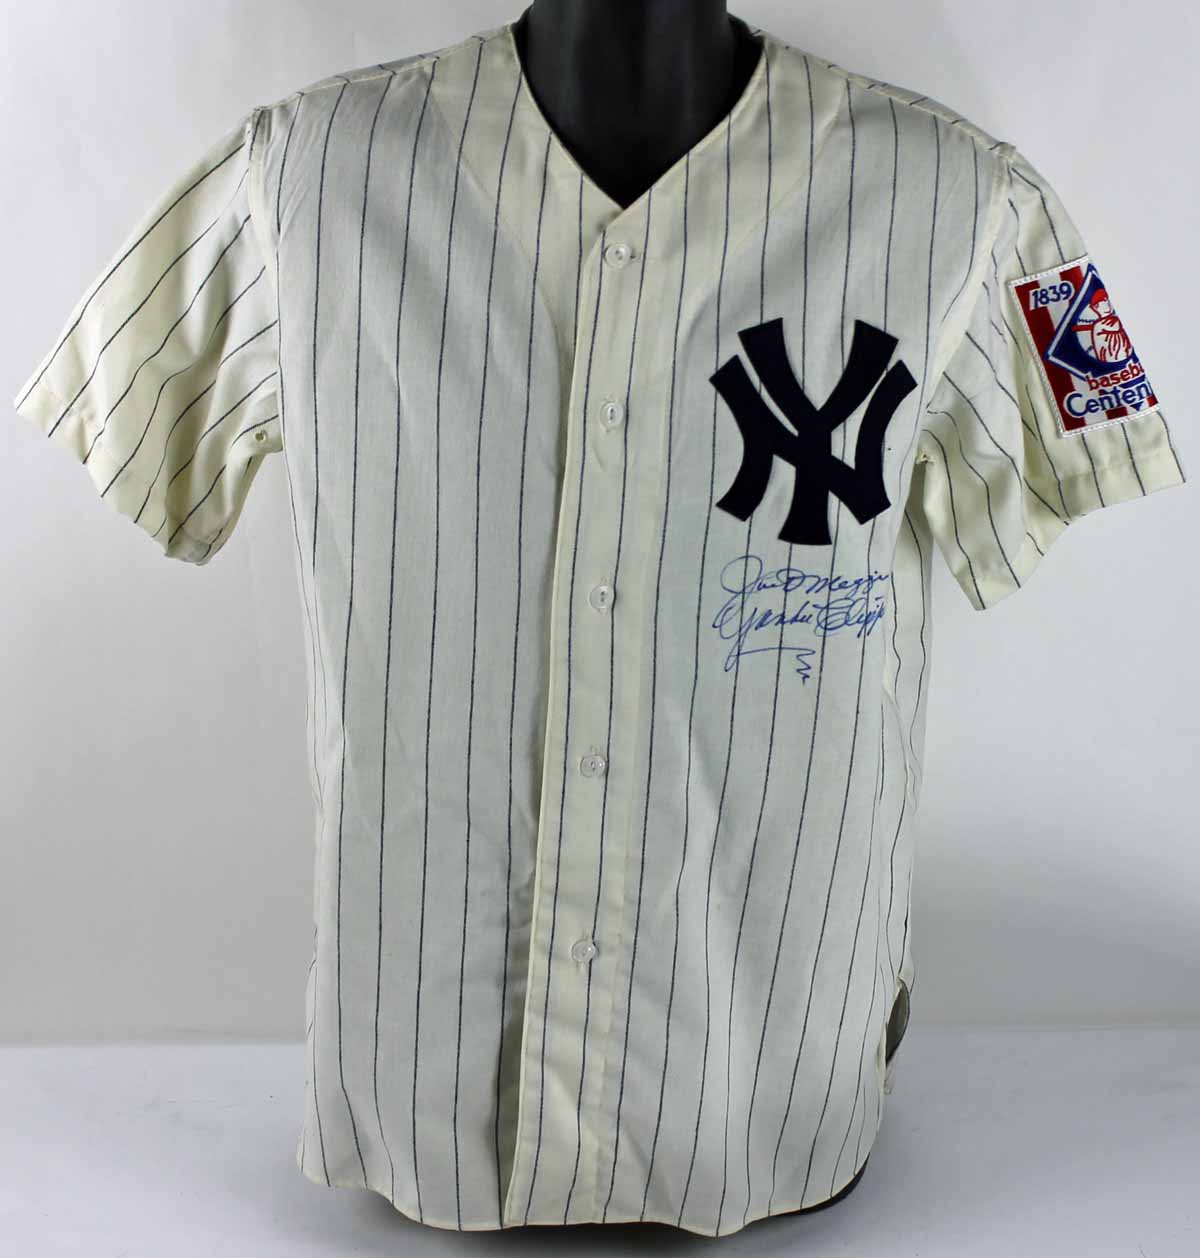 1939 New York Yankees Mitchell and Ness Jersey Signed by Joe DiMaggio